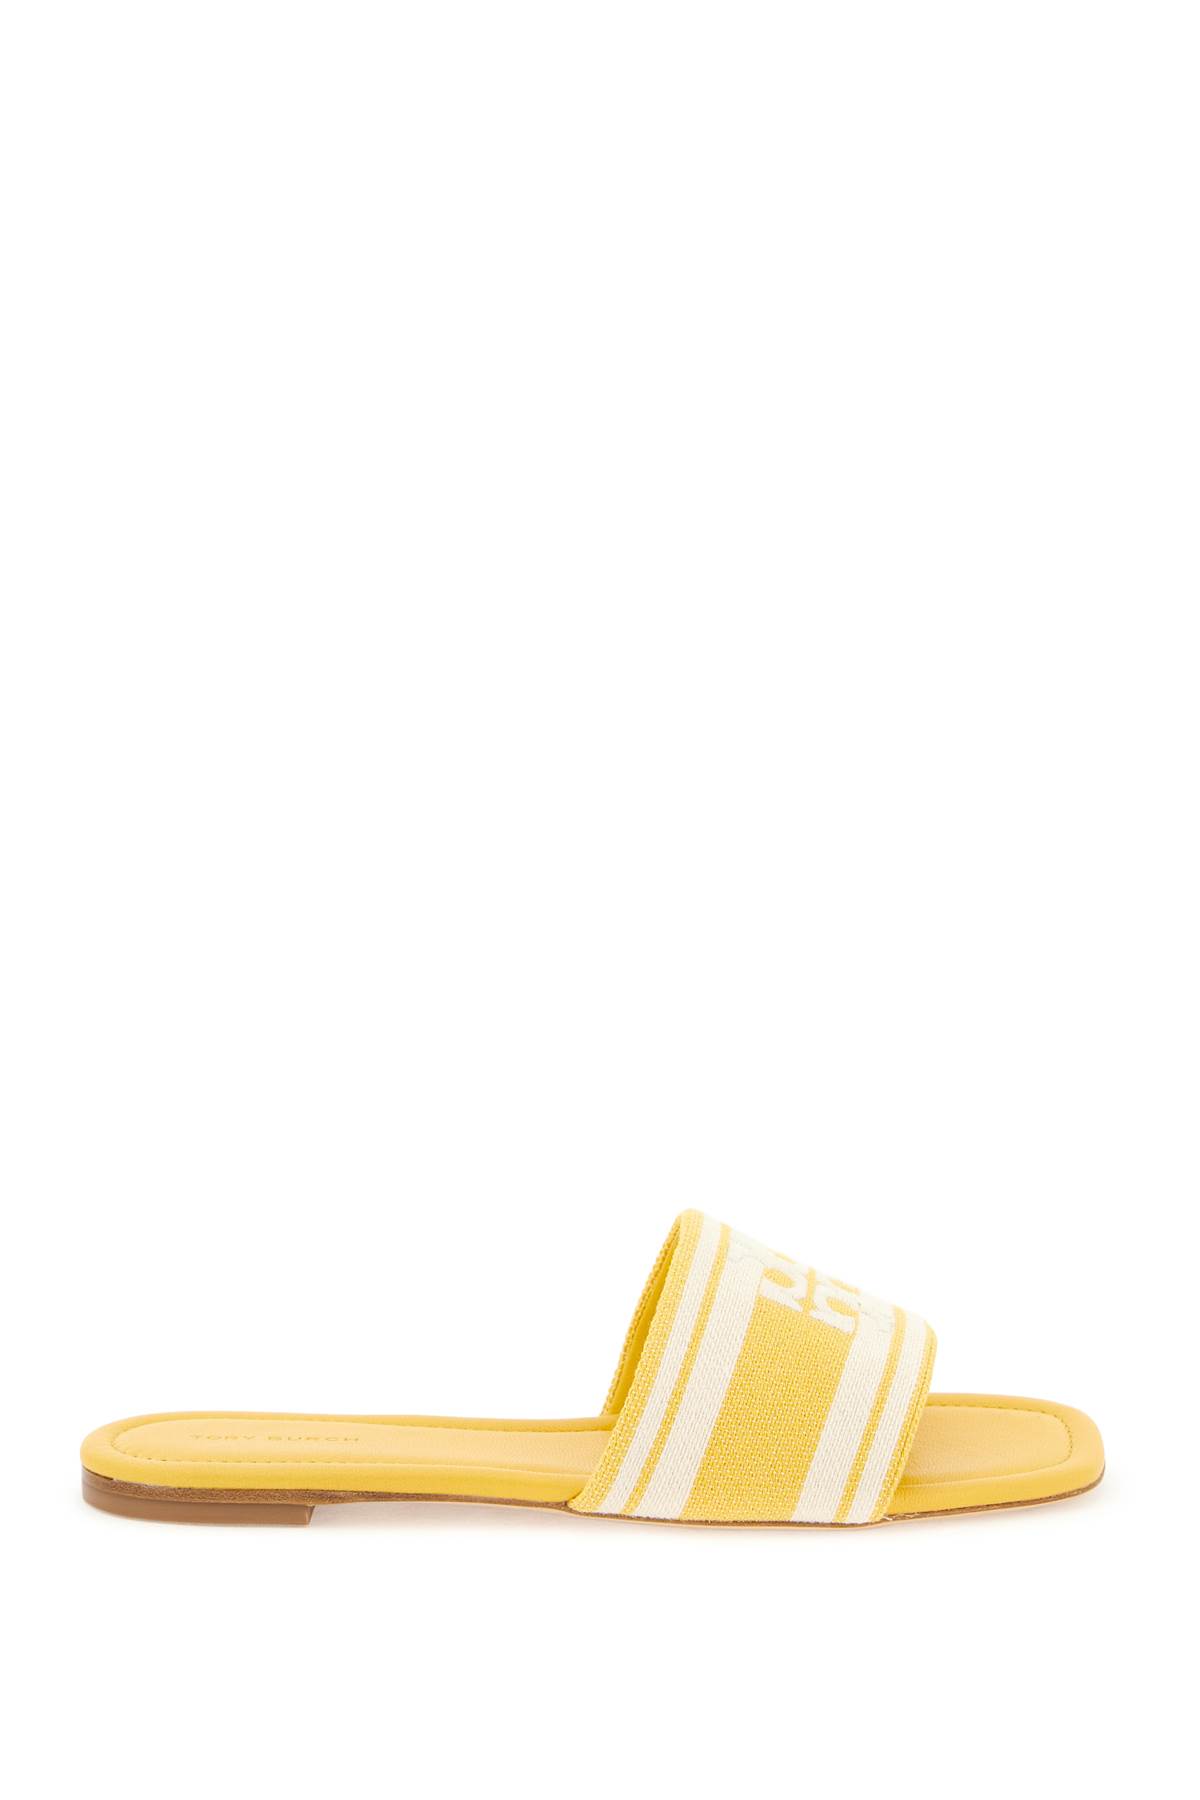 Shop Tory Burch Slides With Embroidered Band In Mellow Yellow Ash White (yellow)